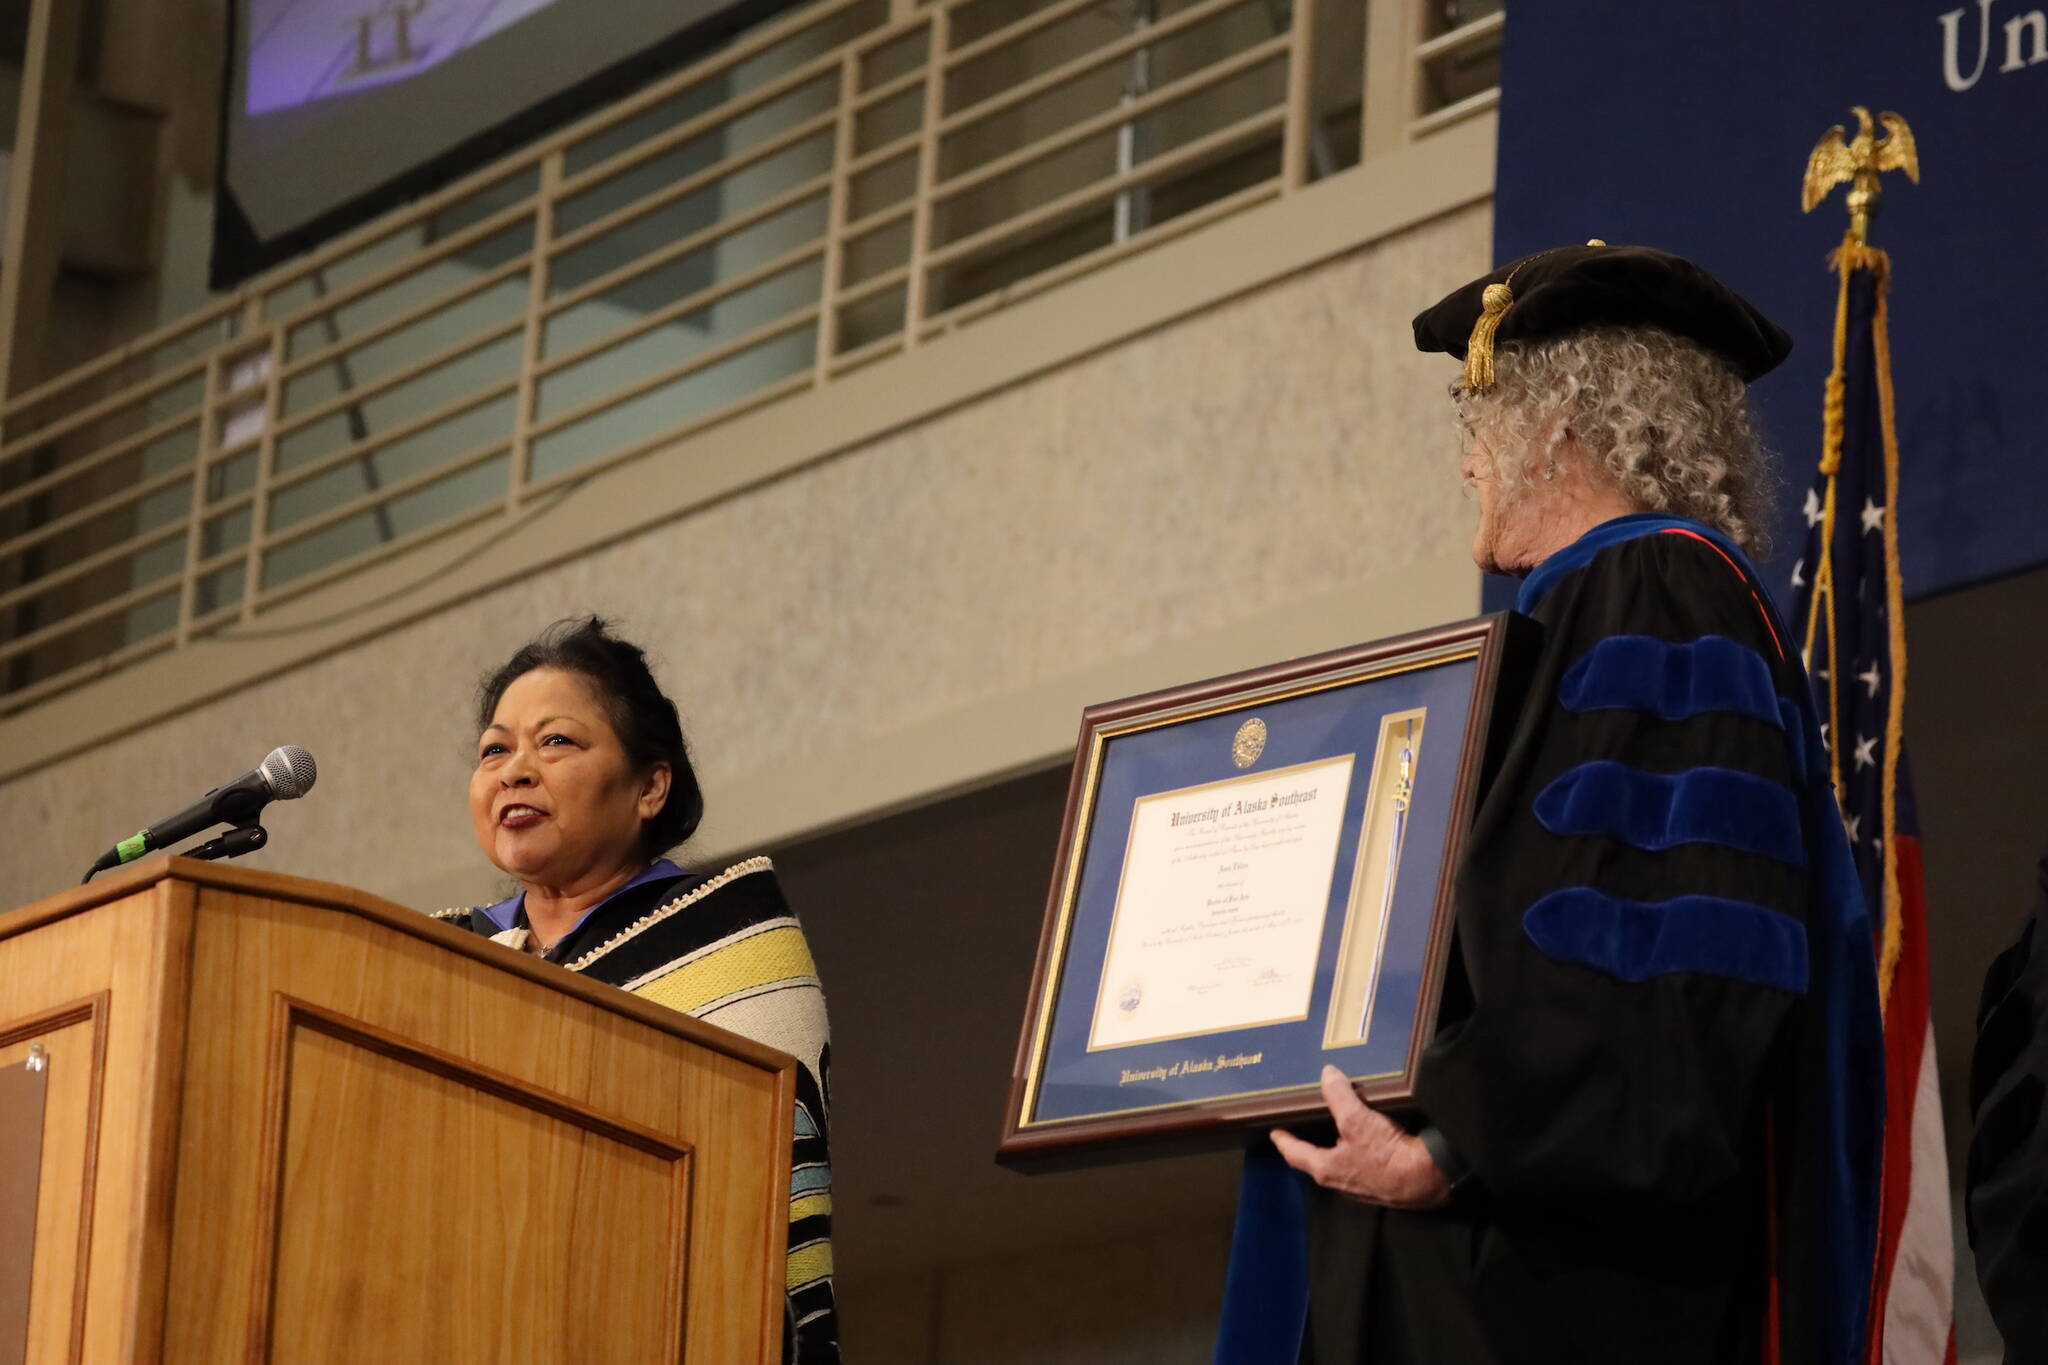 Chilkat weaver Anna Brown Ehlers (left) gives a speech at the 2023 University of Alaska Southeast commencement ceremony Sunday afternoon as Chancellor Karen Karey (right) holds Ehler’s honorary Doctorate of Fine Arts she was bestowed during the event. (Clarise Larson / Juneau Empire)